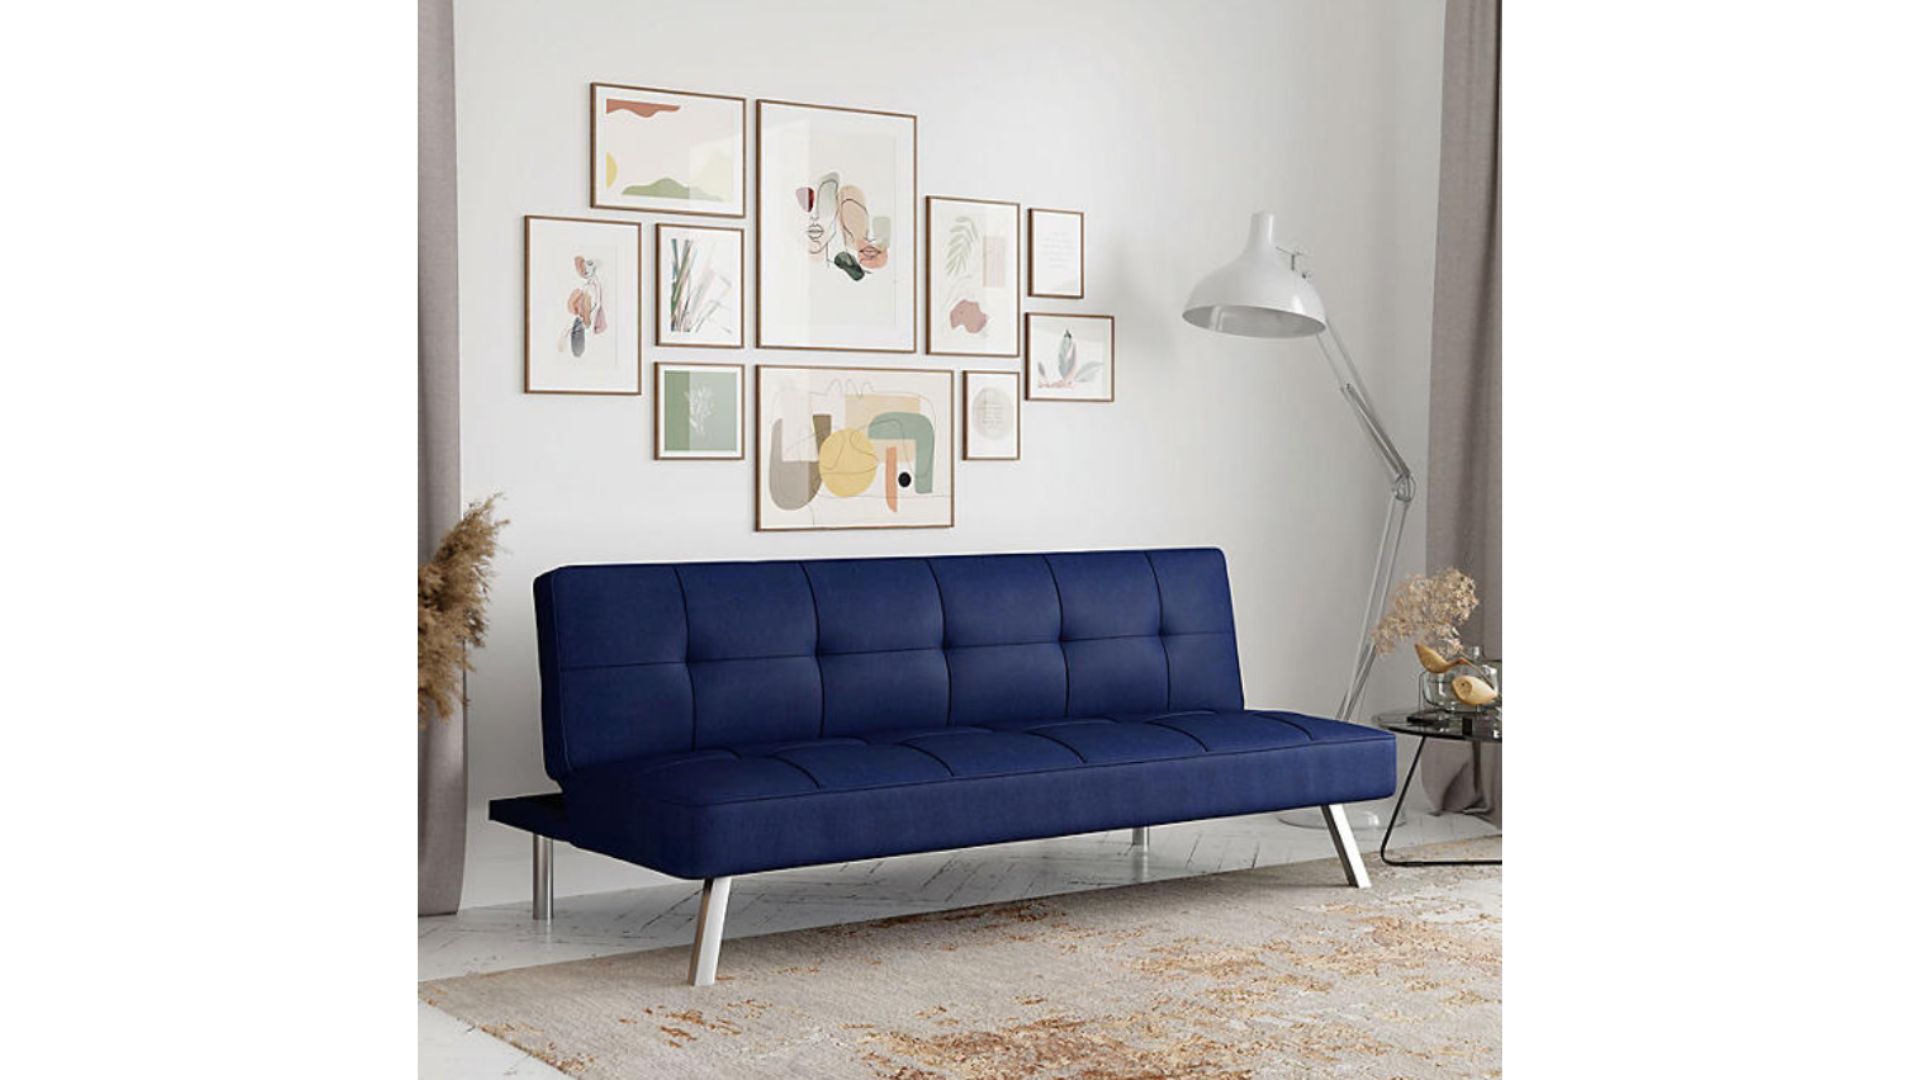 <ul> <li><strong>Price:</strong> <a href="https://www.samsclub.com/p/serta-crestview-convertible-sofa/prod22460588" rel="noreferrer noopener">$189.98</a></li> </ul> <p>Currently, there are 365 one-star reviews for the Serta Crestview convertible sofa on the Sam's Club website. </p> <p>One recurring complaint is that this sofa arrives broken or breaks easily. A reviewer, Paige, said that their sofa broke just after five weeks of owning it. Other reported springs came out as soon as a week after making the purchase.</p> <p><strong>See More: <a href="https://www.gobankingrates.com/saving-money/food/expensive-grocery-items-even-frugal-people-buy/?utm_term=related_link_3&utm_campaign=1266949&utm_source=msn.com&utm_content=5&utm_medium=rss" rel="">6 Expensive Grocery Items Even Frugal People Buy</a><br>Explore Next: <a href="https://www.gobankingrates.com/saving-money/food/food-items-you-should-always-buy-at-walmart/?utm_term=related_link_4&utm_campaign=1266949&utm_source=msn.com&utm_content=6&utm_medium=rss" rel="">5 Food Items You Should Always Buy at Walmart</a></strong></p> <p><strong>Sponsored: </strong><a href="https://products.gobankingrates.com/pub/9e562dc4-52f4-11ec-a8c2-0e0b1012e14d?targeting%5Bcompany_product%5D=tra&utm_source=msn.com&utm_campaign=rss&passthru=msn.com" rel="noreferrer noopener nofollow">Owe the IRS $10K or more? Schedule a FREE consultation to see if you qualify for tax relief.</a></p>